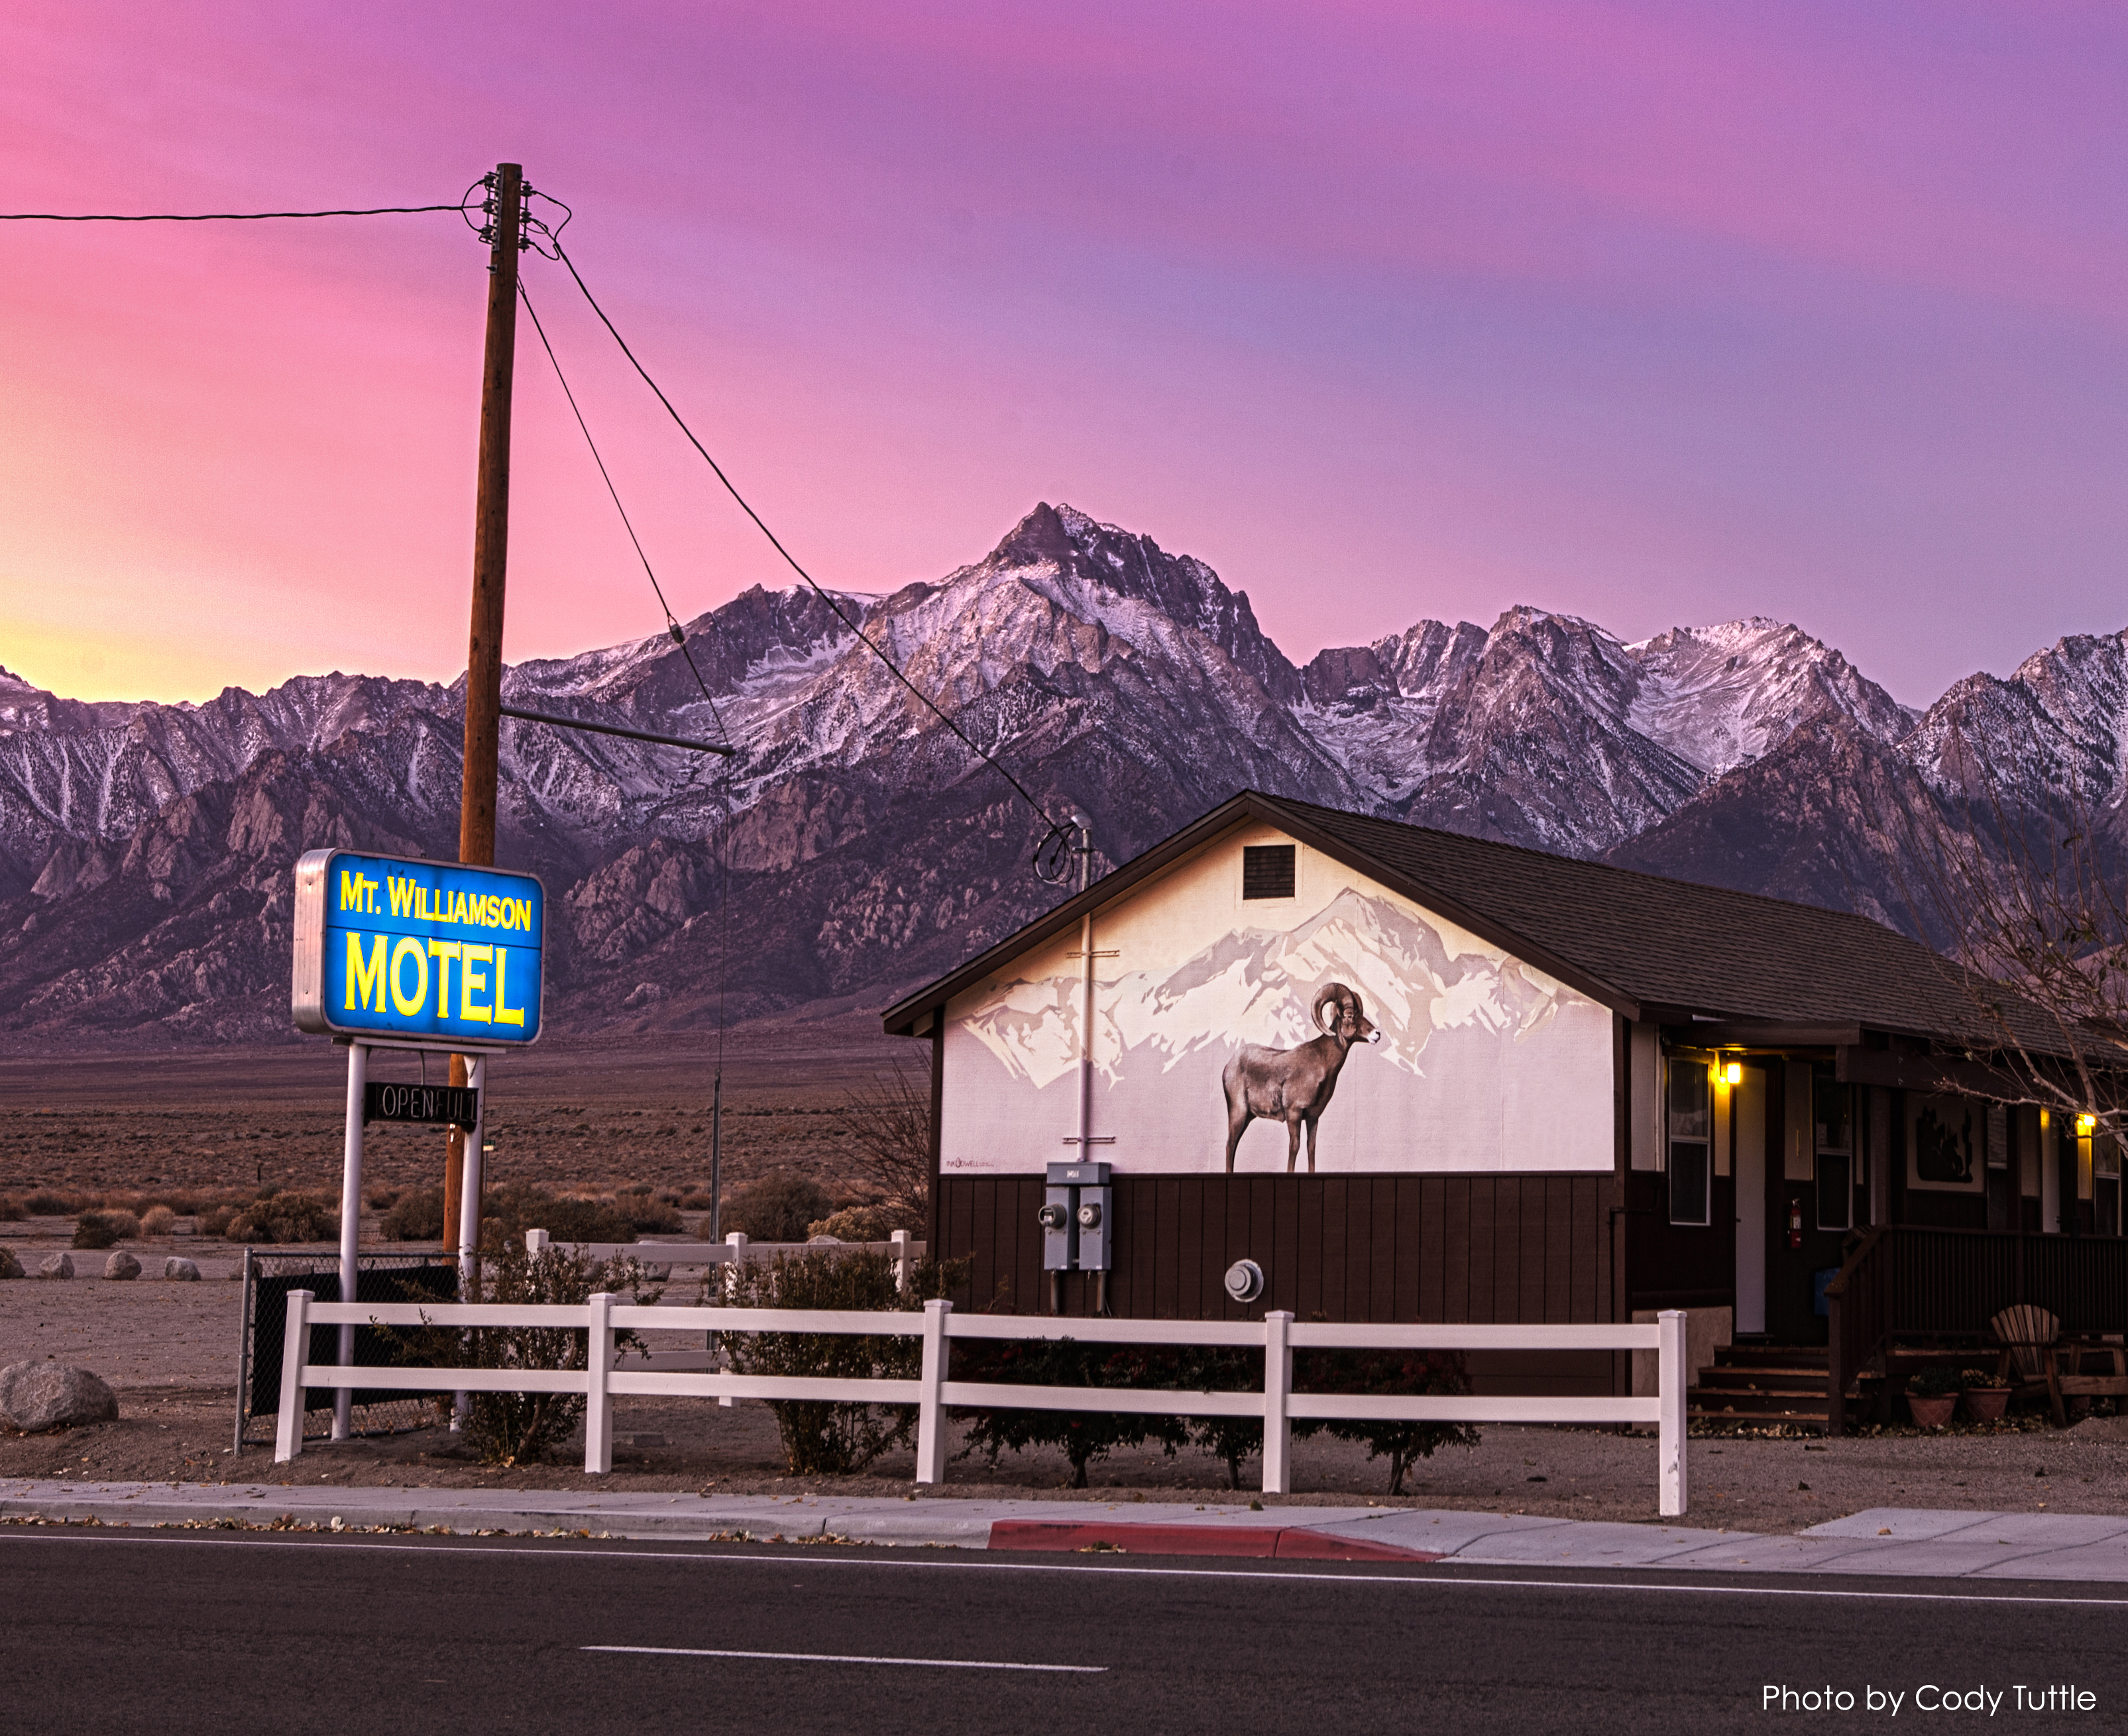 Mural of a bighorn sheep on the end of a motel building. The snow-capped mountains of California's Sierra Nevada rise in the background.